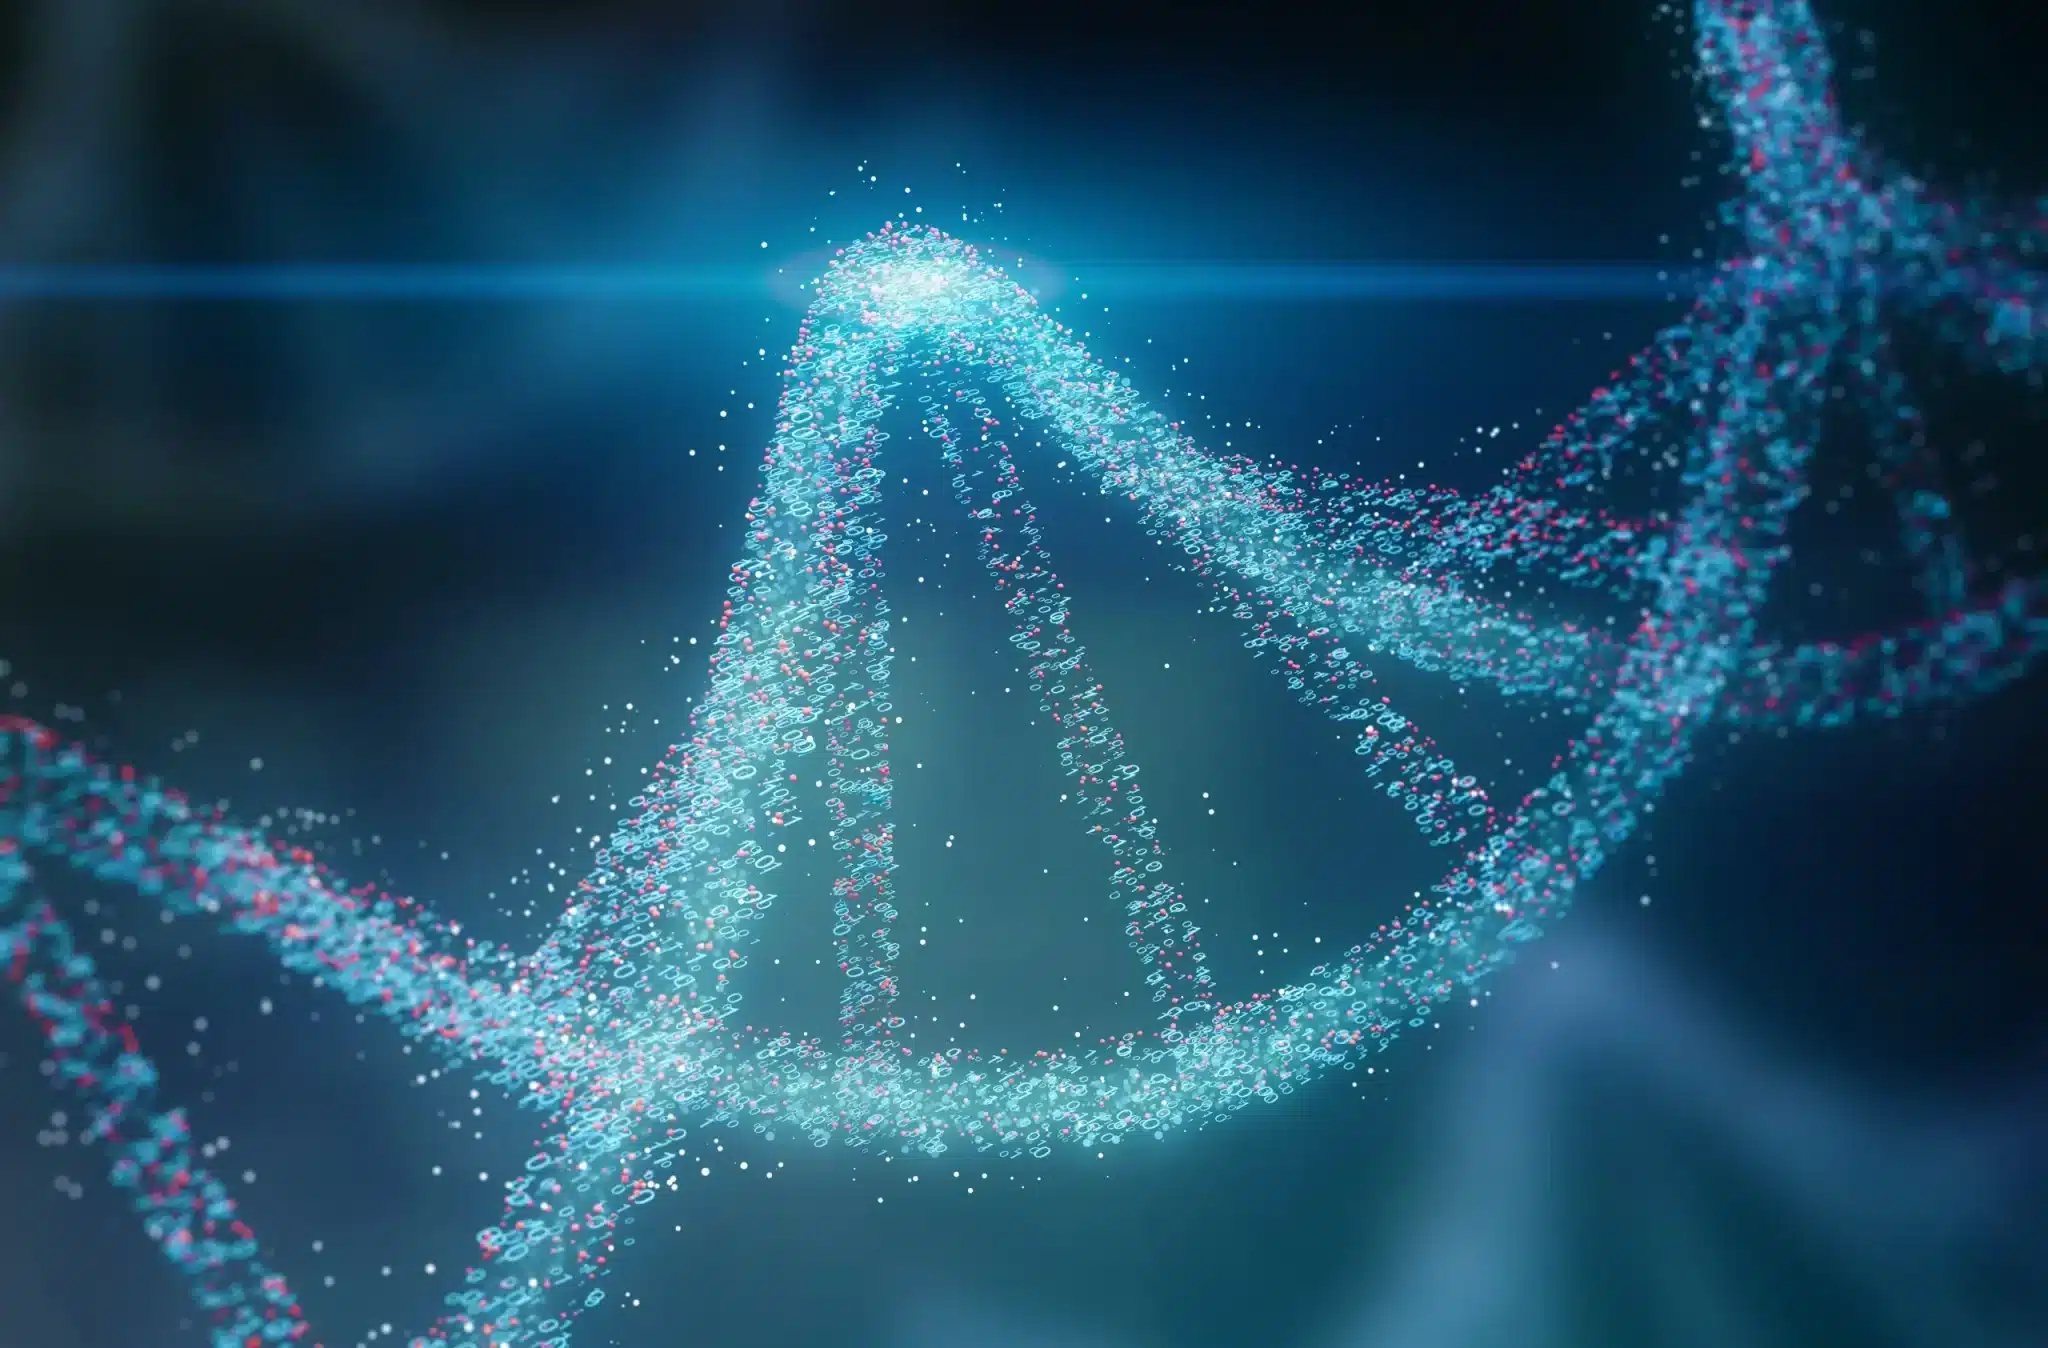 A digital illustration of a DNA double helix, with a sequence of particles representing nucleotides spiraling upwards in a glow of blue and red against a dark, moody background. The visual effect captures the complexity and mystery of genetic science.